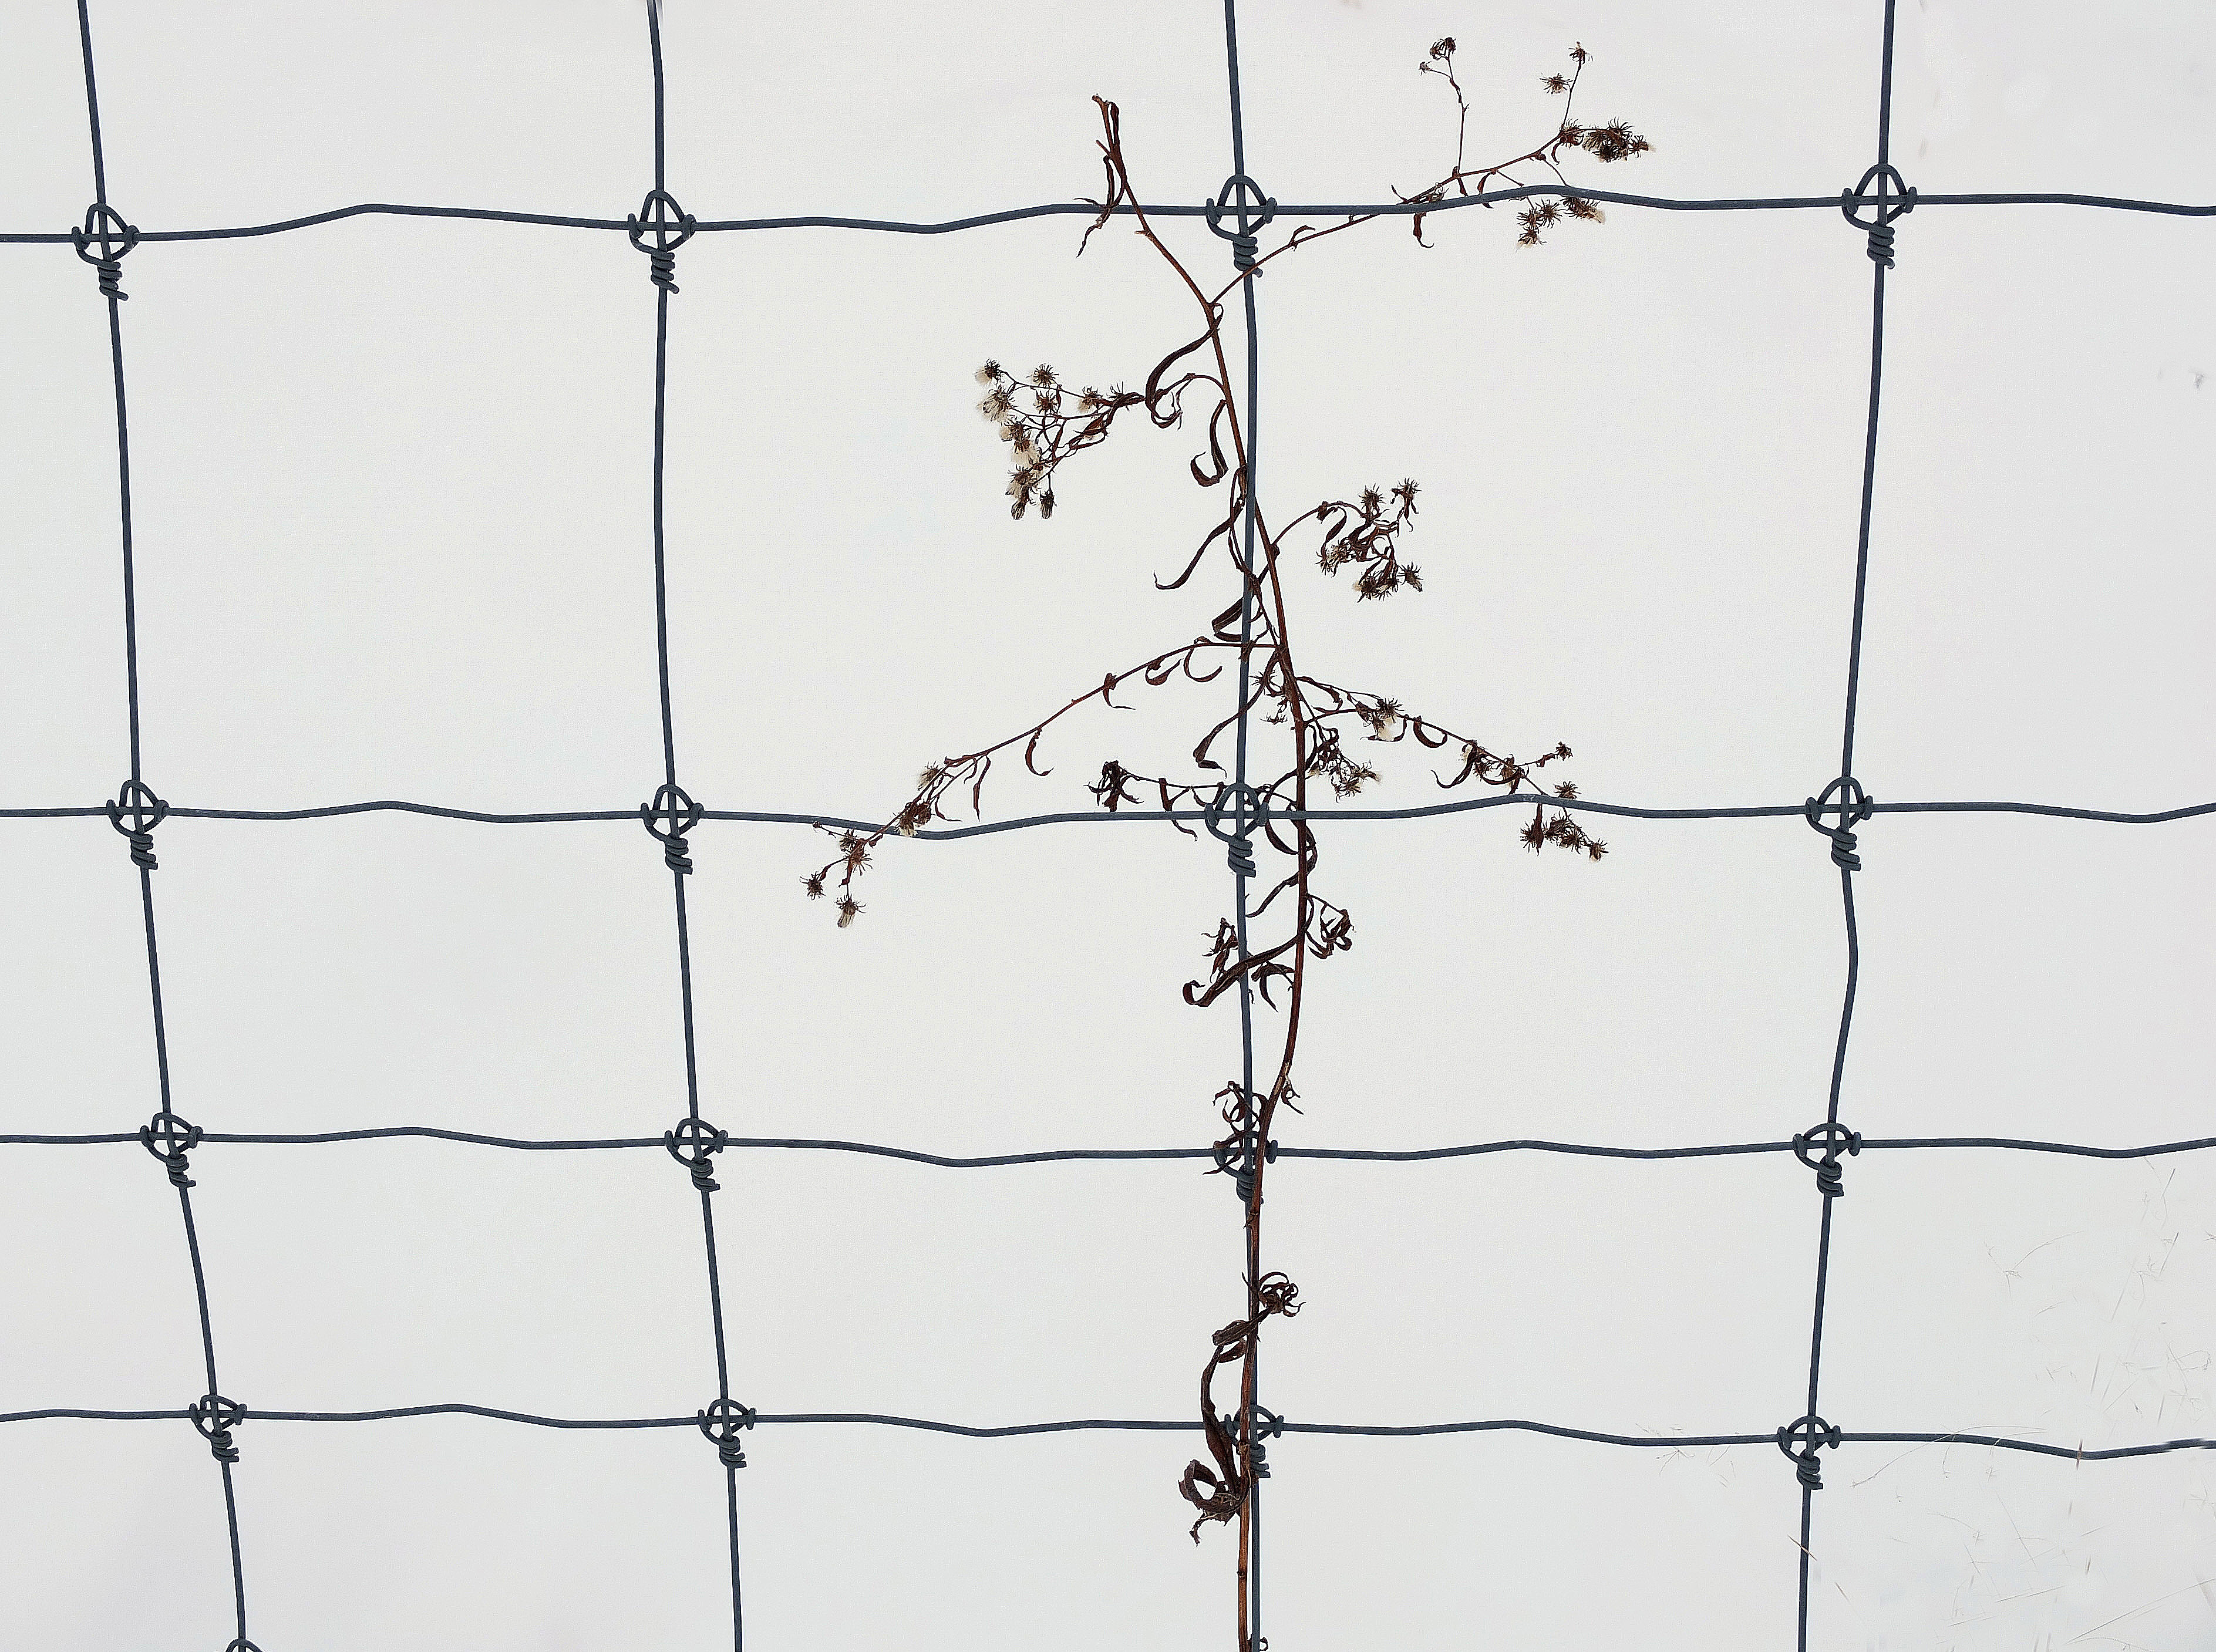 Weed on Fence - Snowmobile Trail 1-15-15.jpg